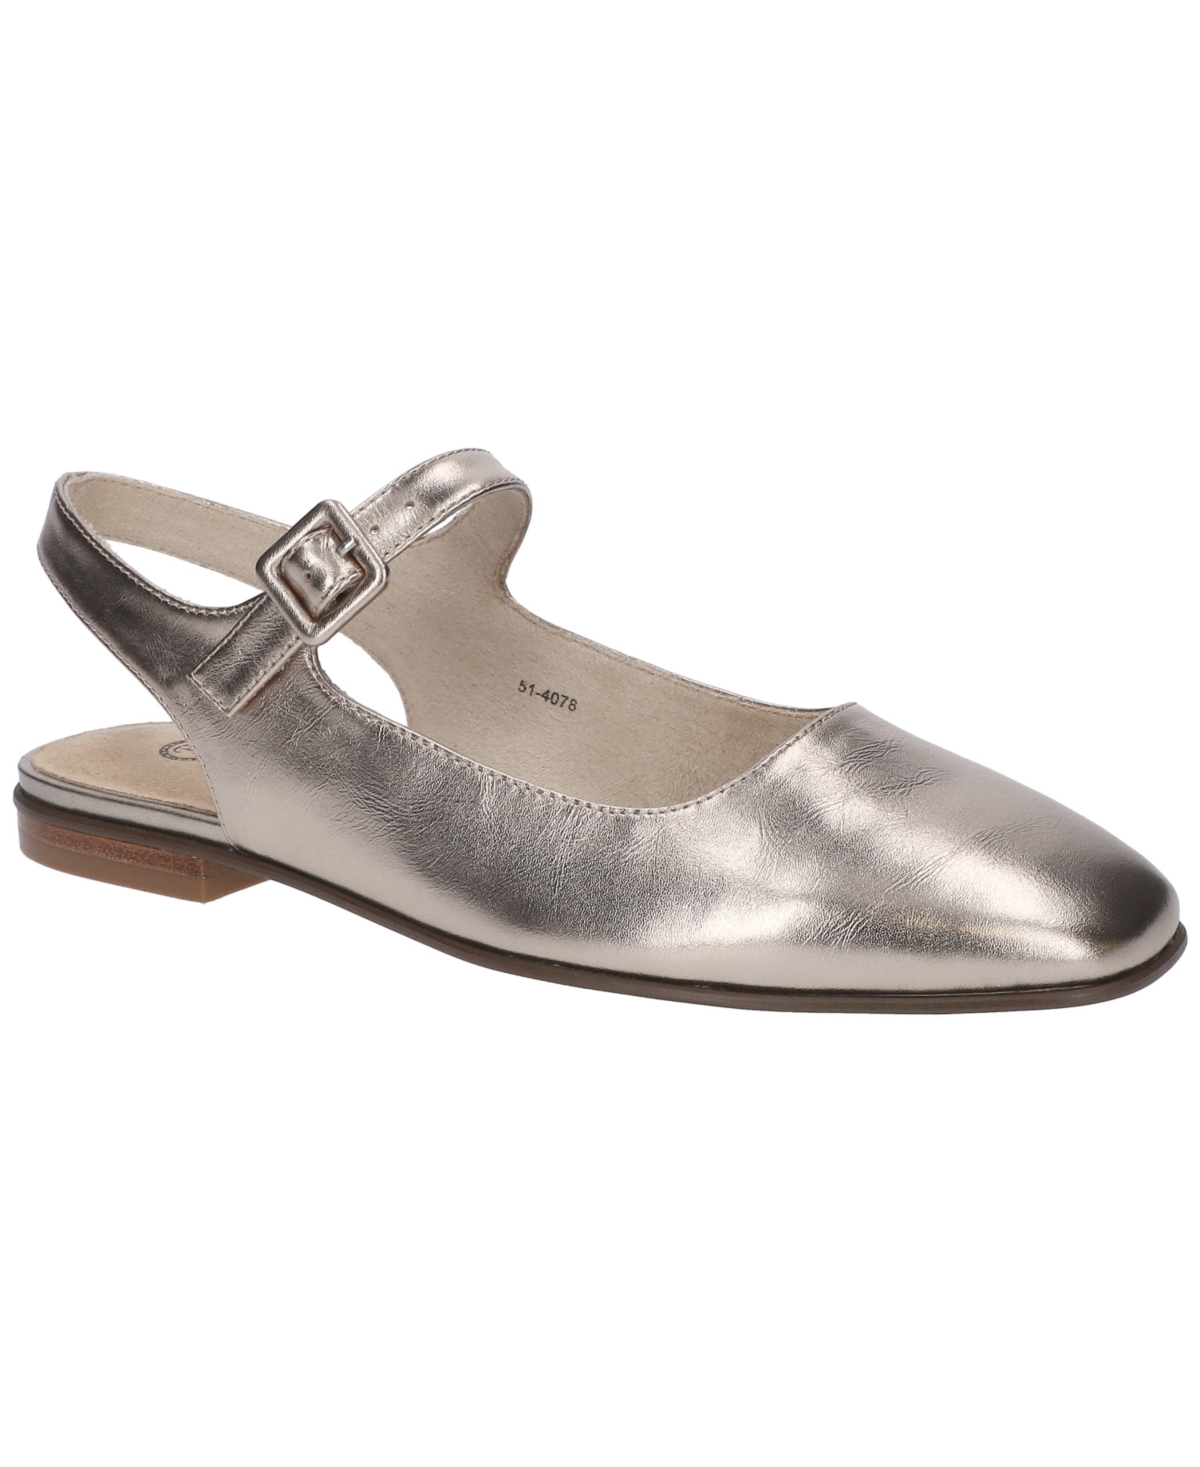 Women's Andie Mary Jane Flats - Champagne Leather